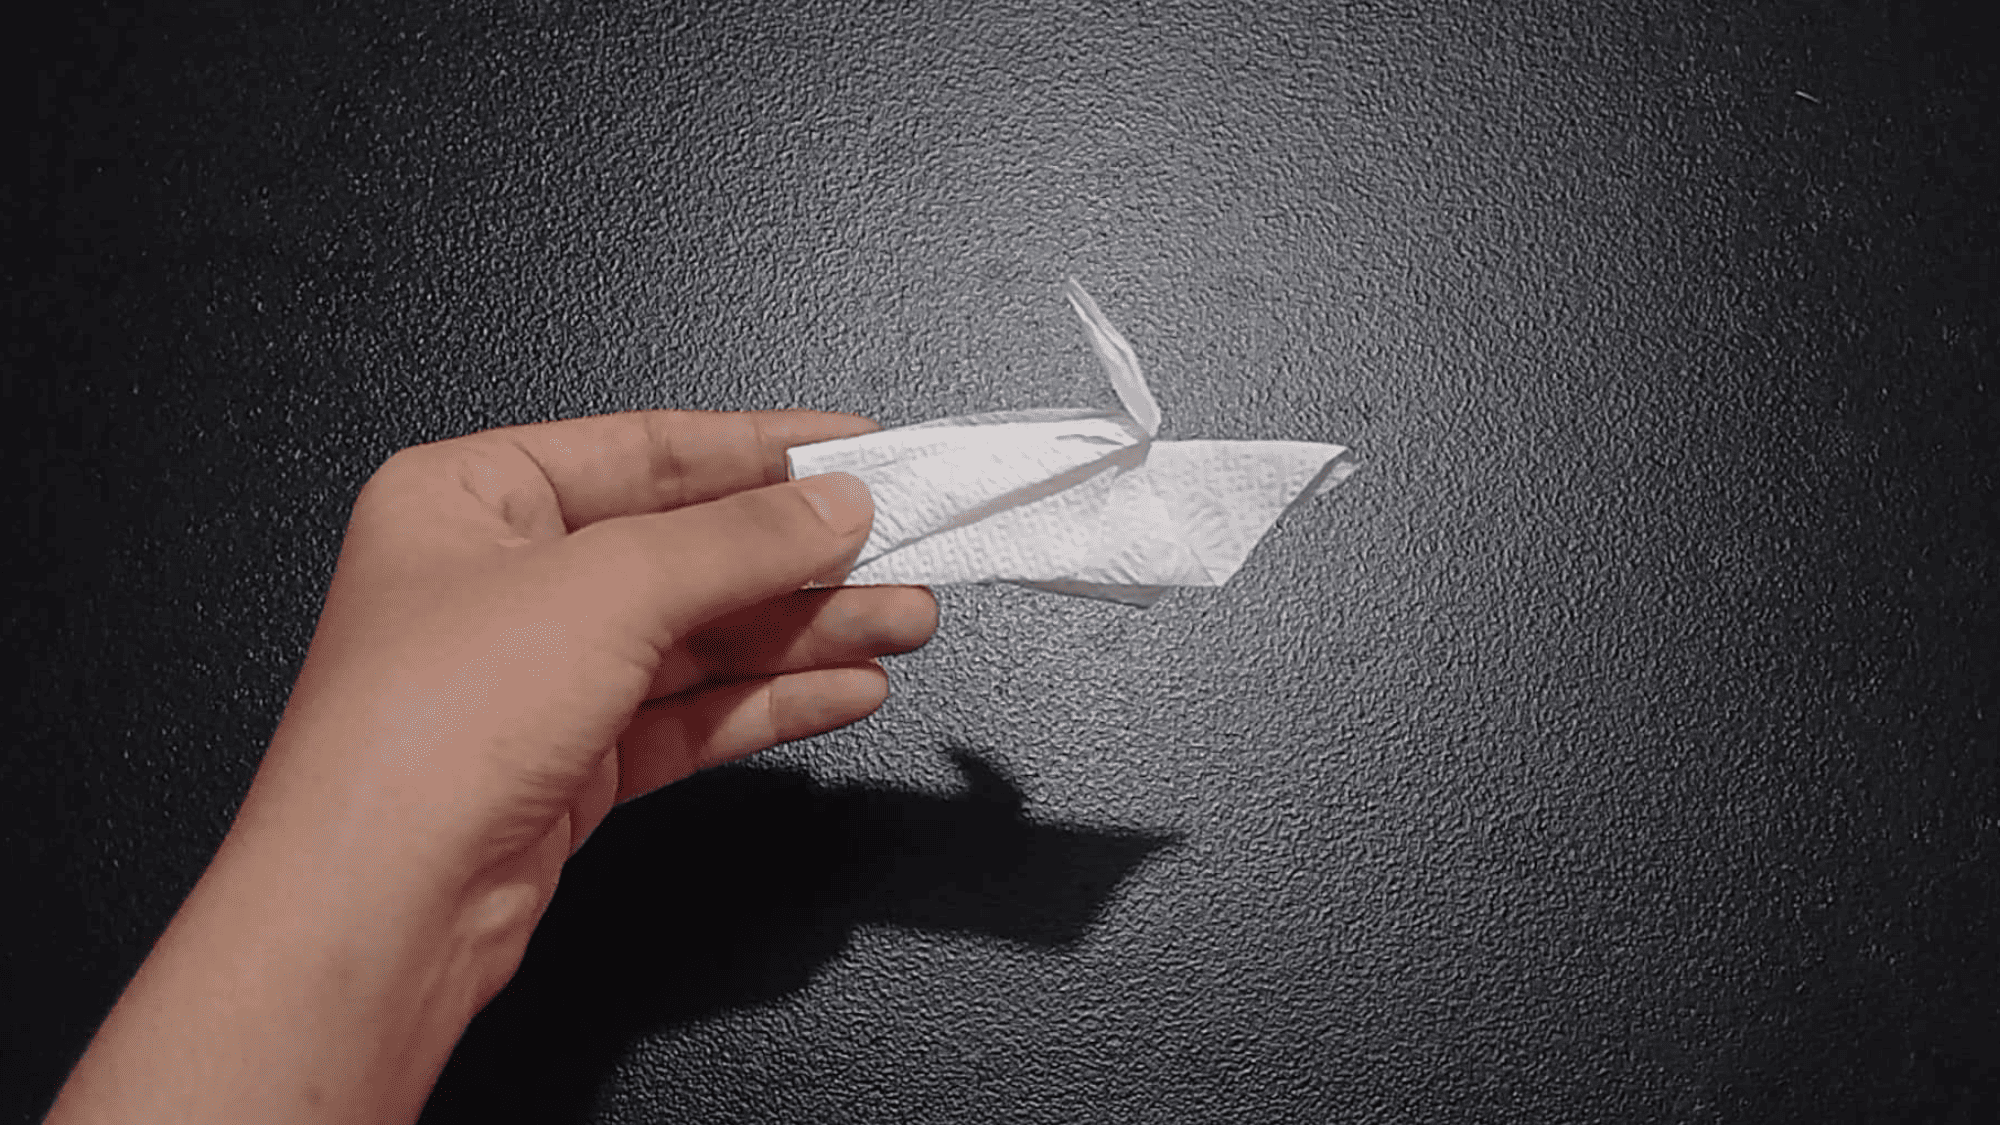 https://www.origamiway.com/images/napkin-swan/napkin-swan-origami-step-6.png